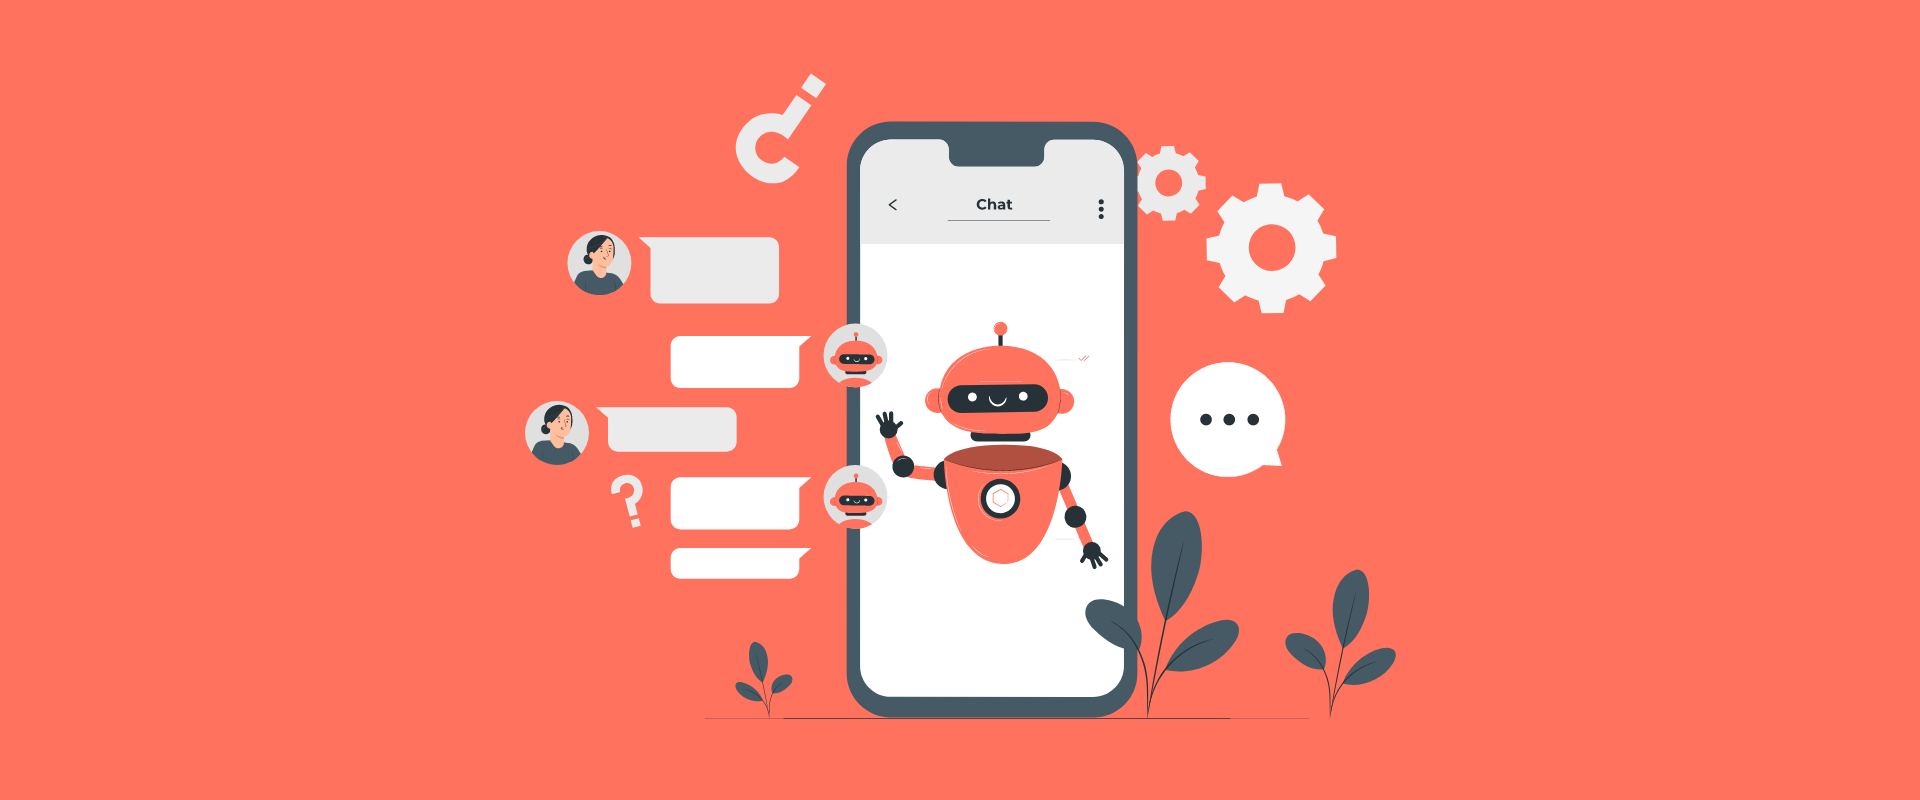 How To Build an AI Chatbot Like ChatGPT?